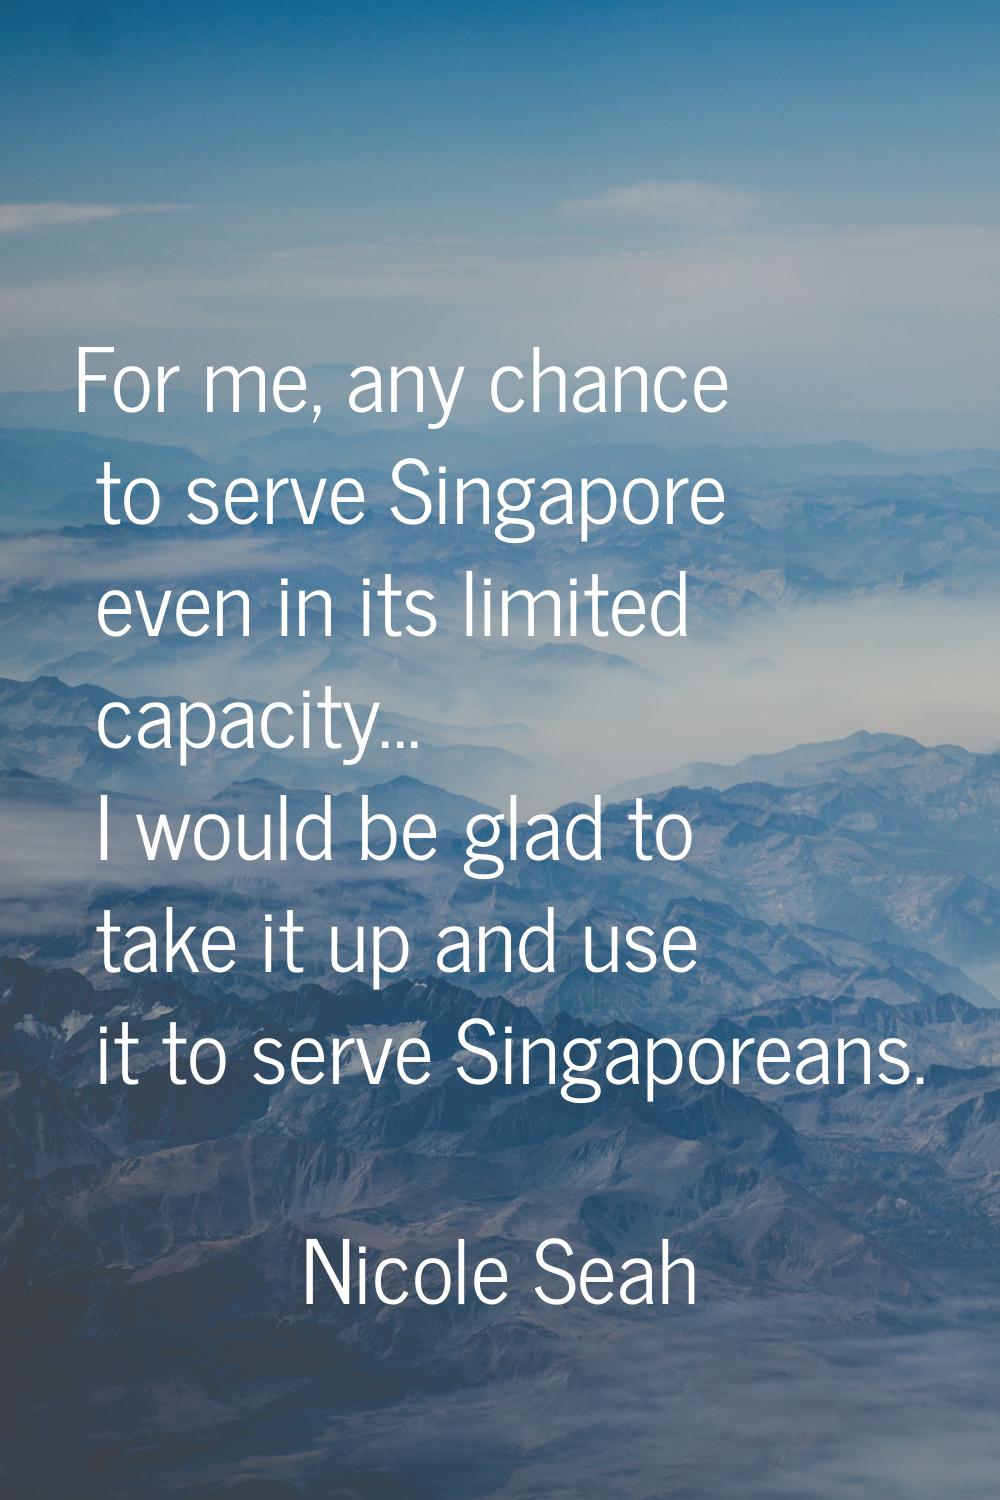 For me, any chance to serve Singapore even in its limited capacity... I would be glad to take it up